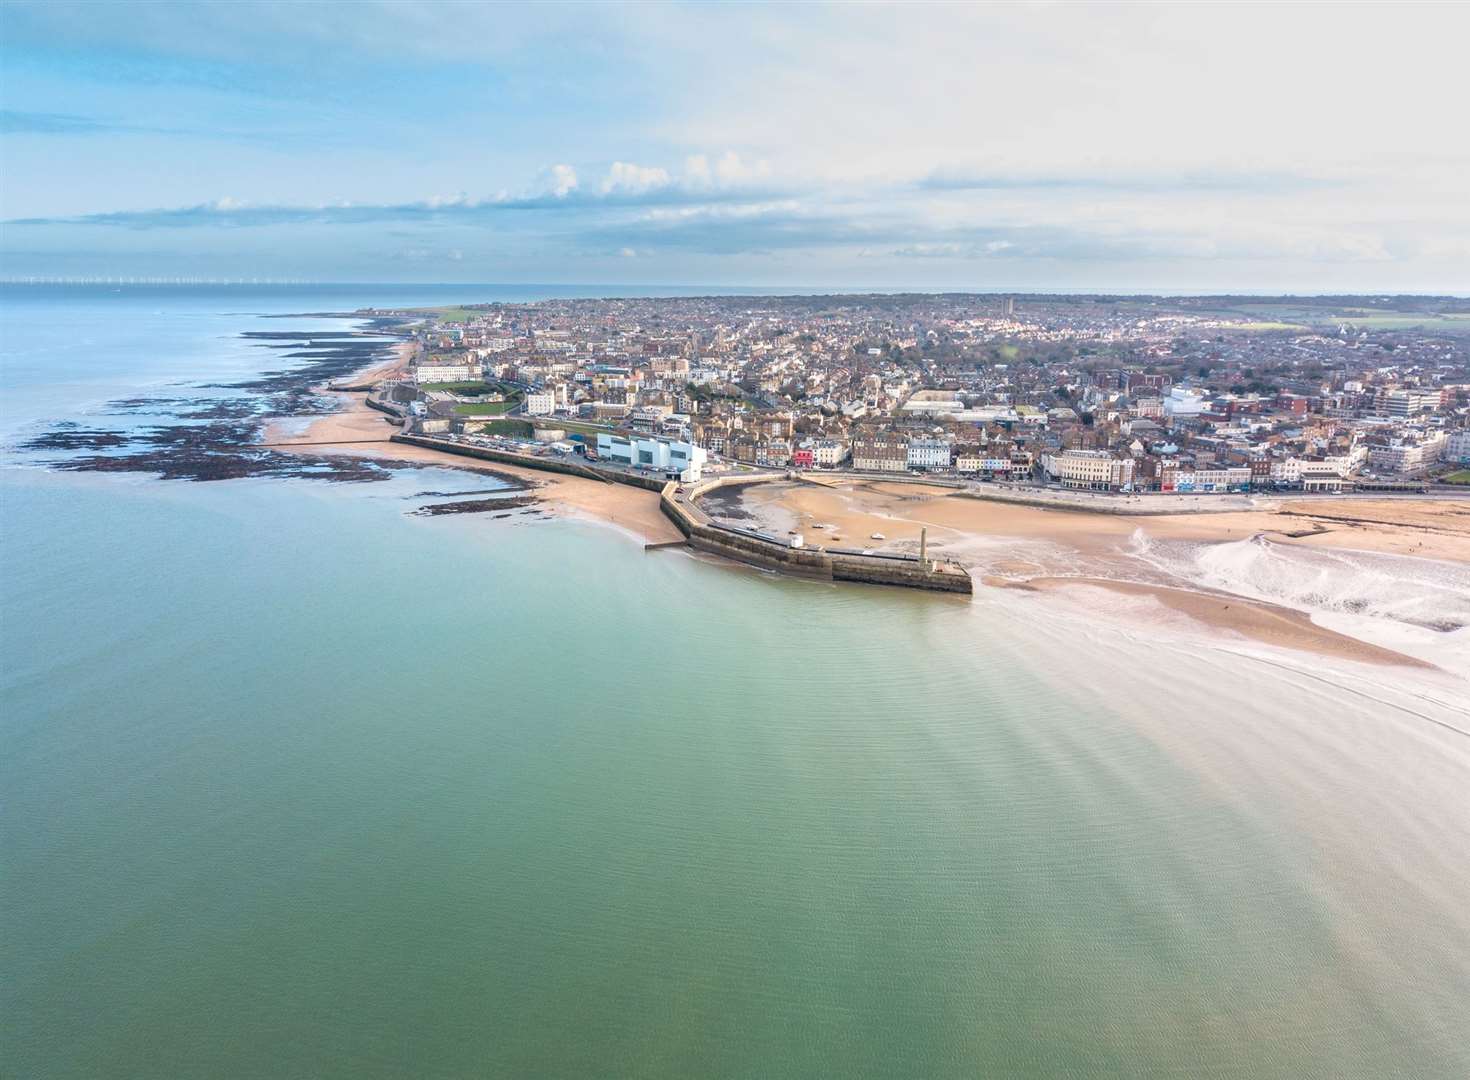 Margate has seen huge property price rises over the past decade – but have they now peaked?